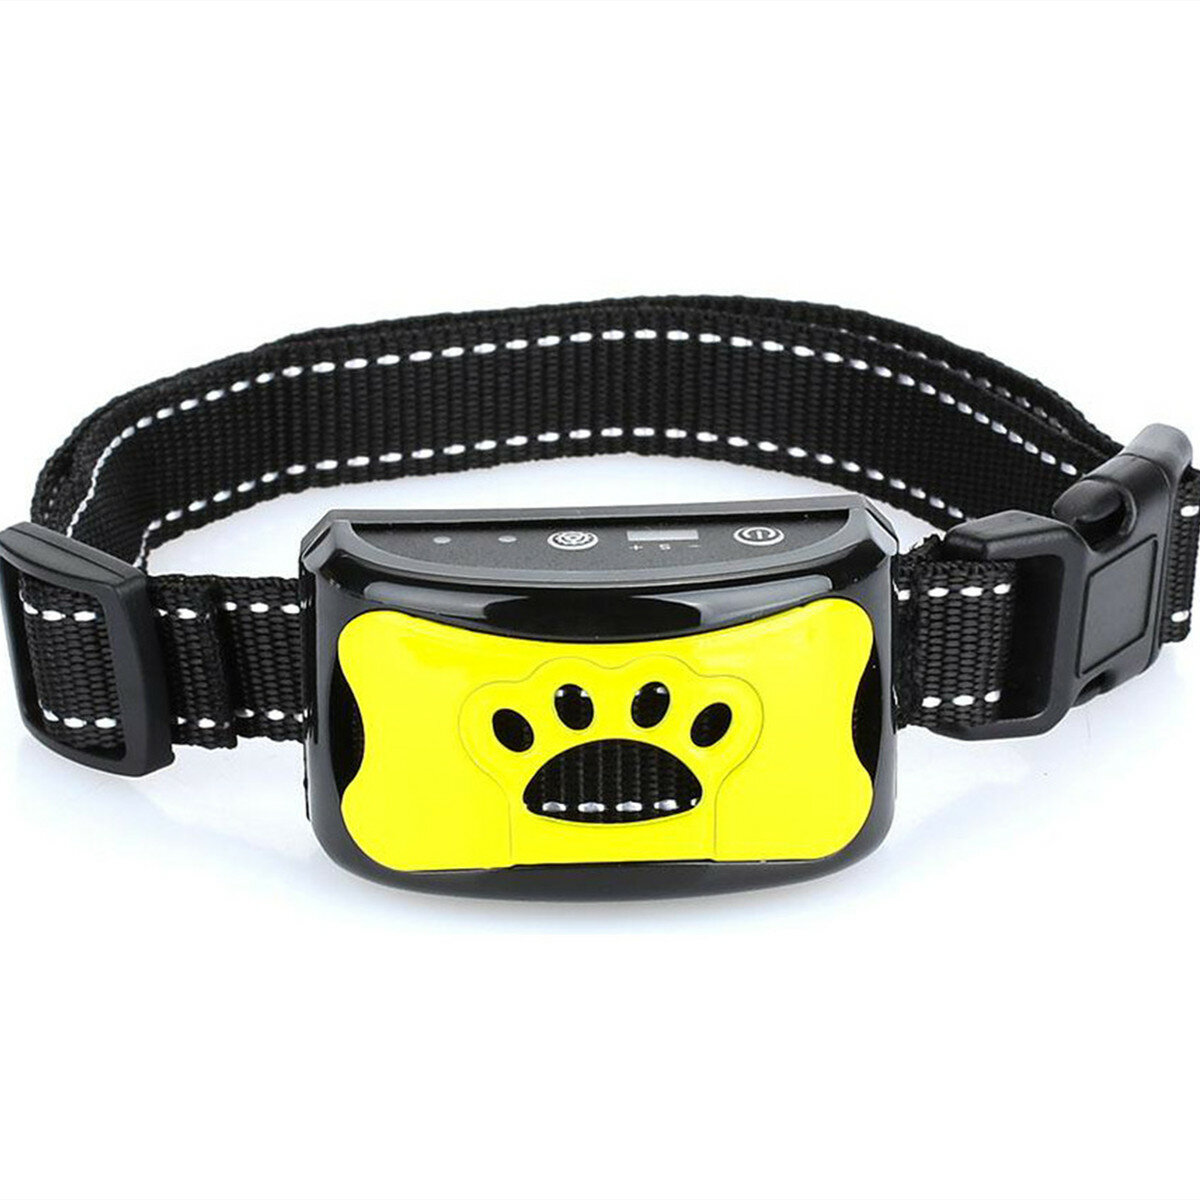 Dog Training Collar Anti Bark Electric Shock Vibration Remote With Customized Audio Commands-heyidear